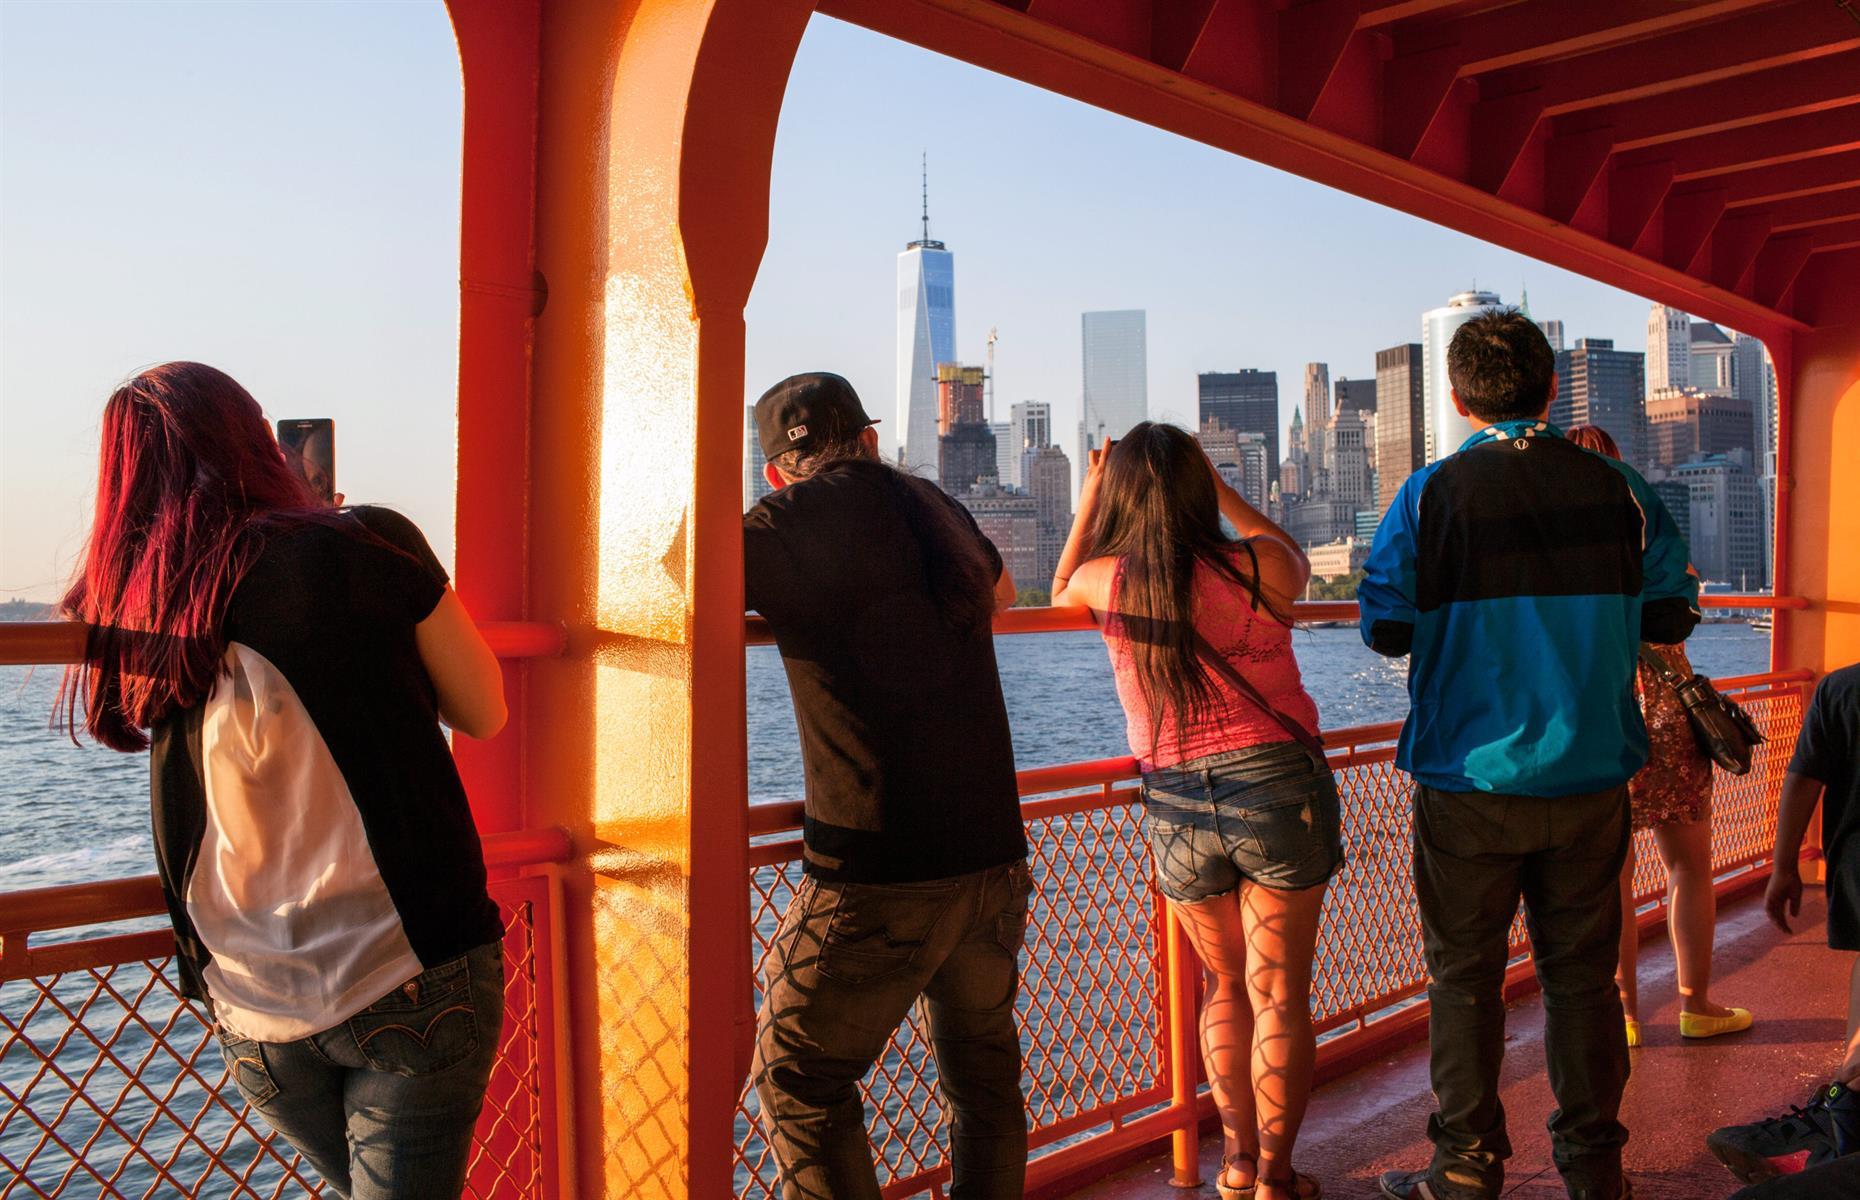 The Best Of New York City For FREE - Top Attractions Revealed